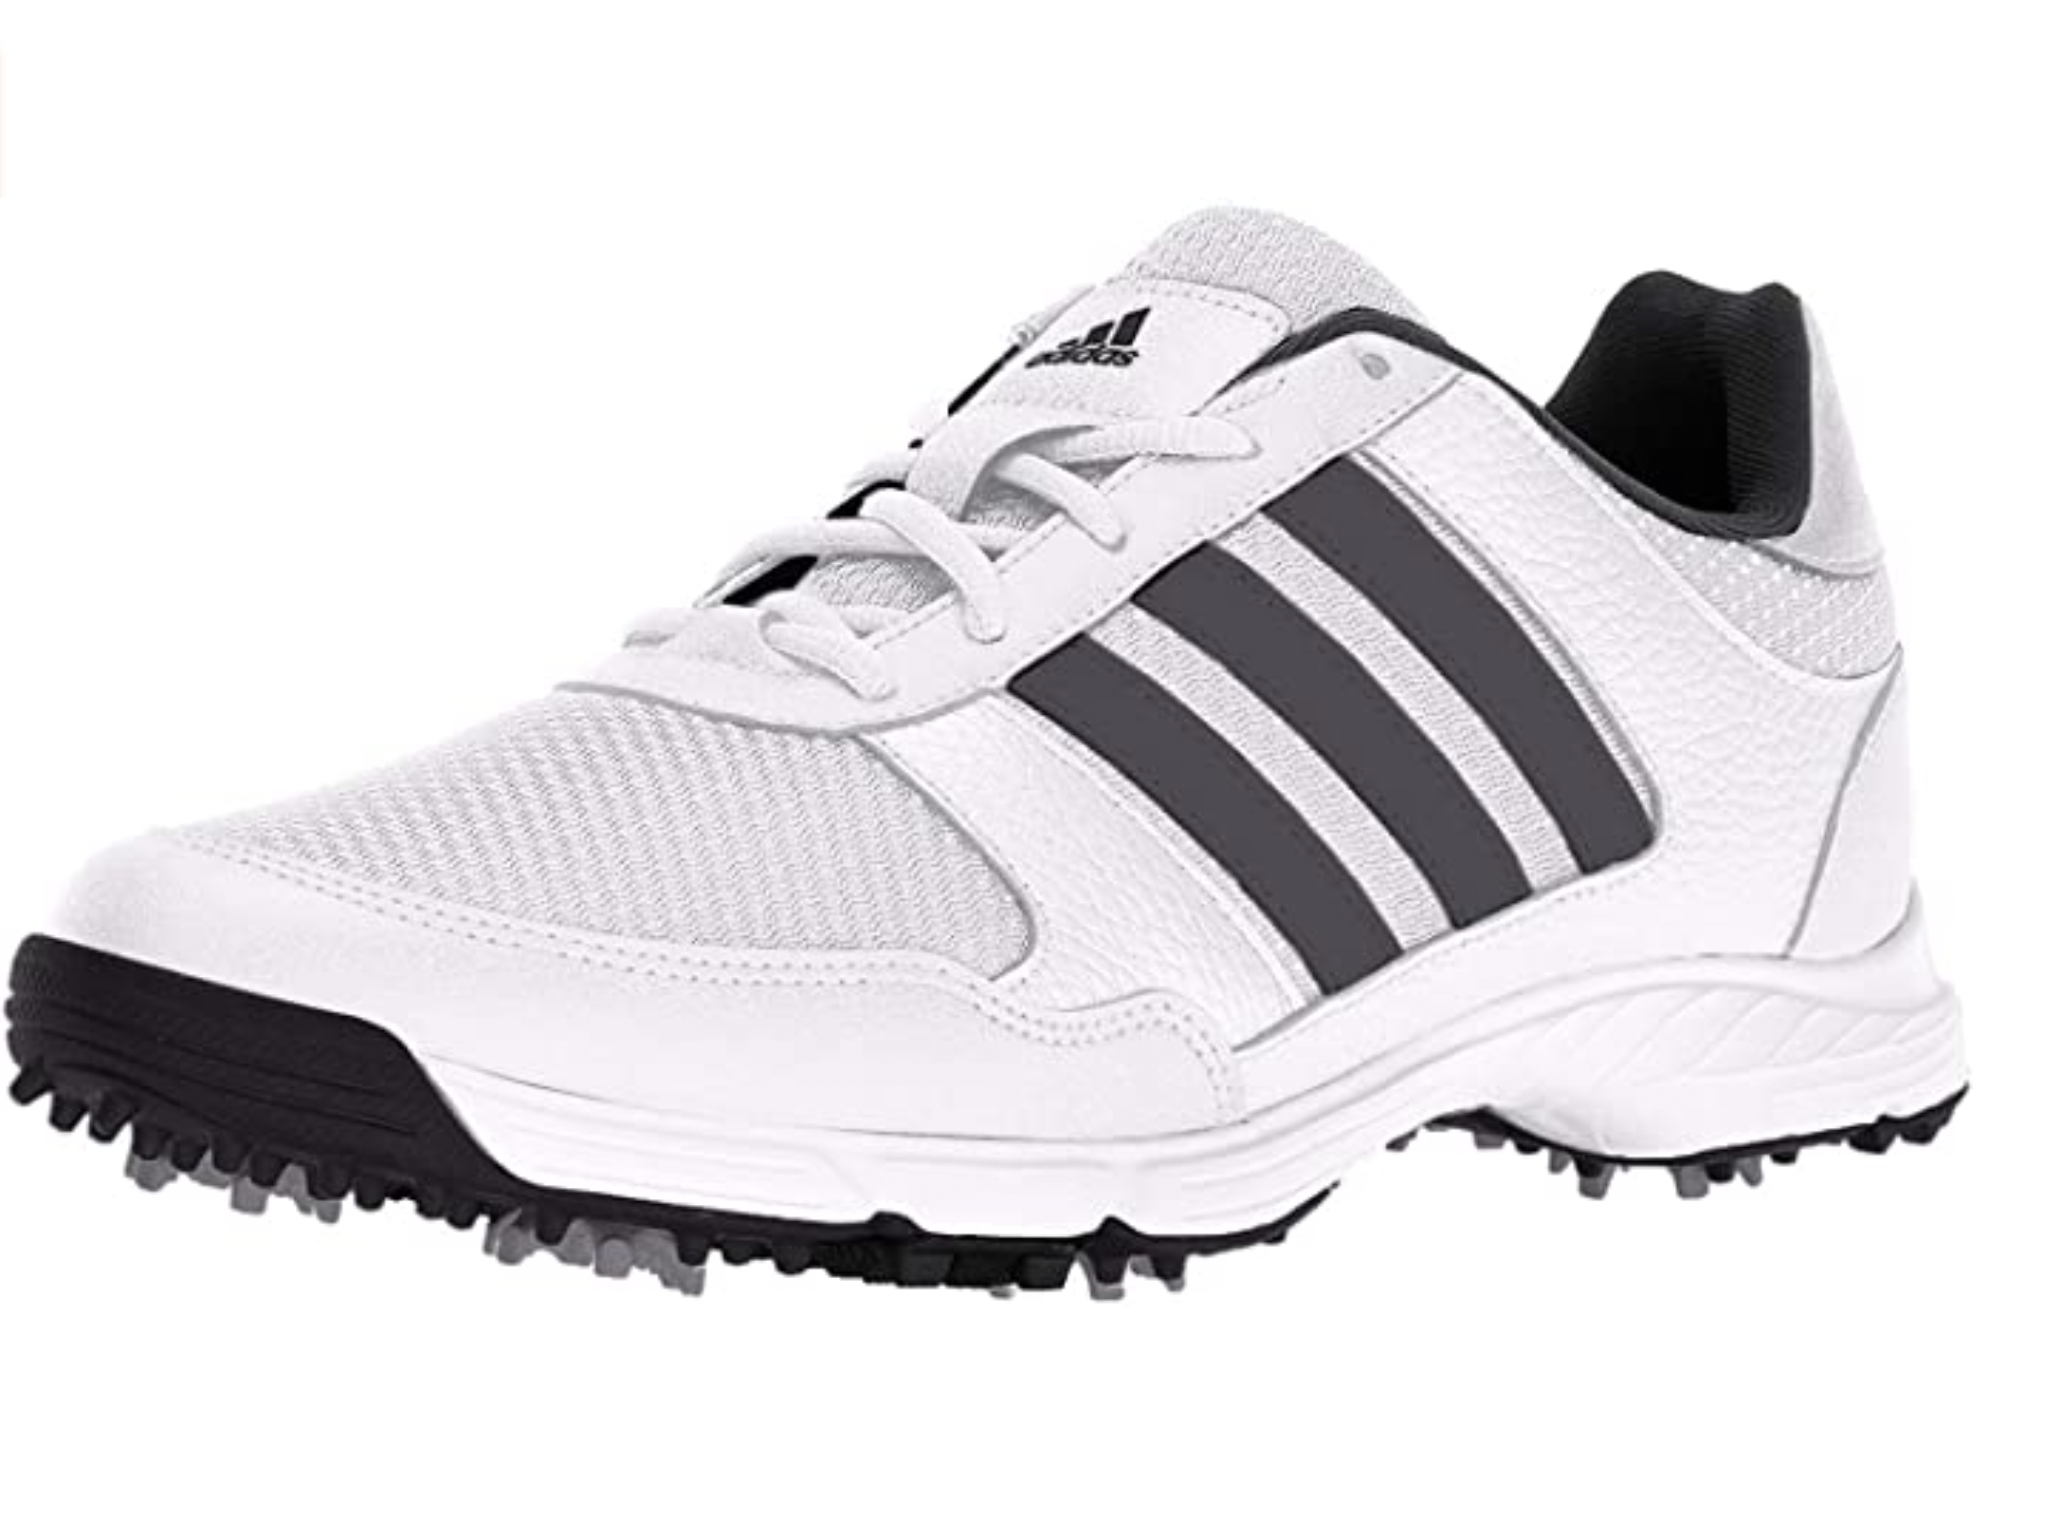 The top-selling golf footwear might surprise